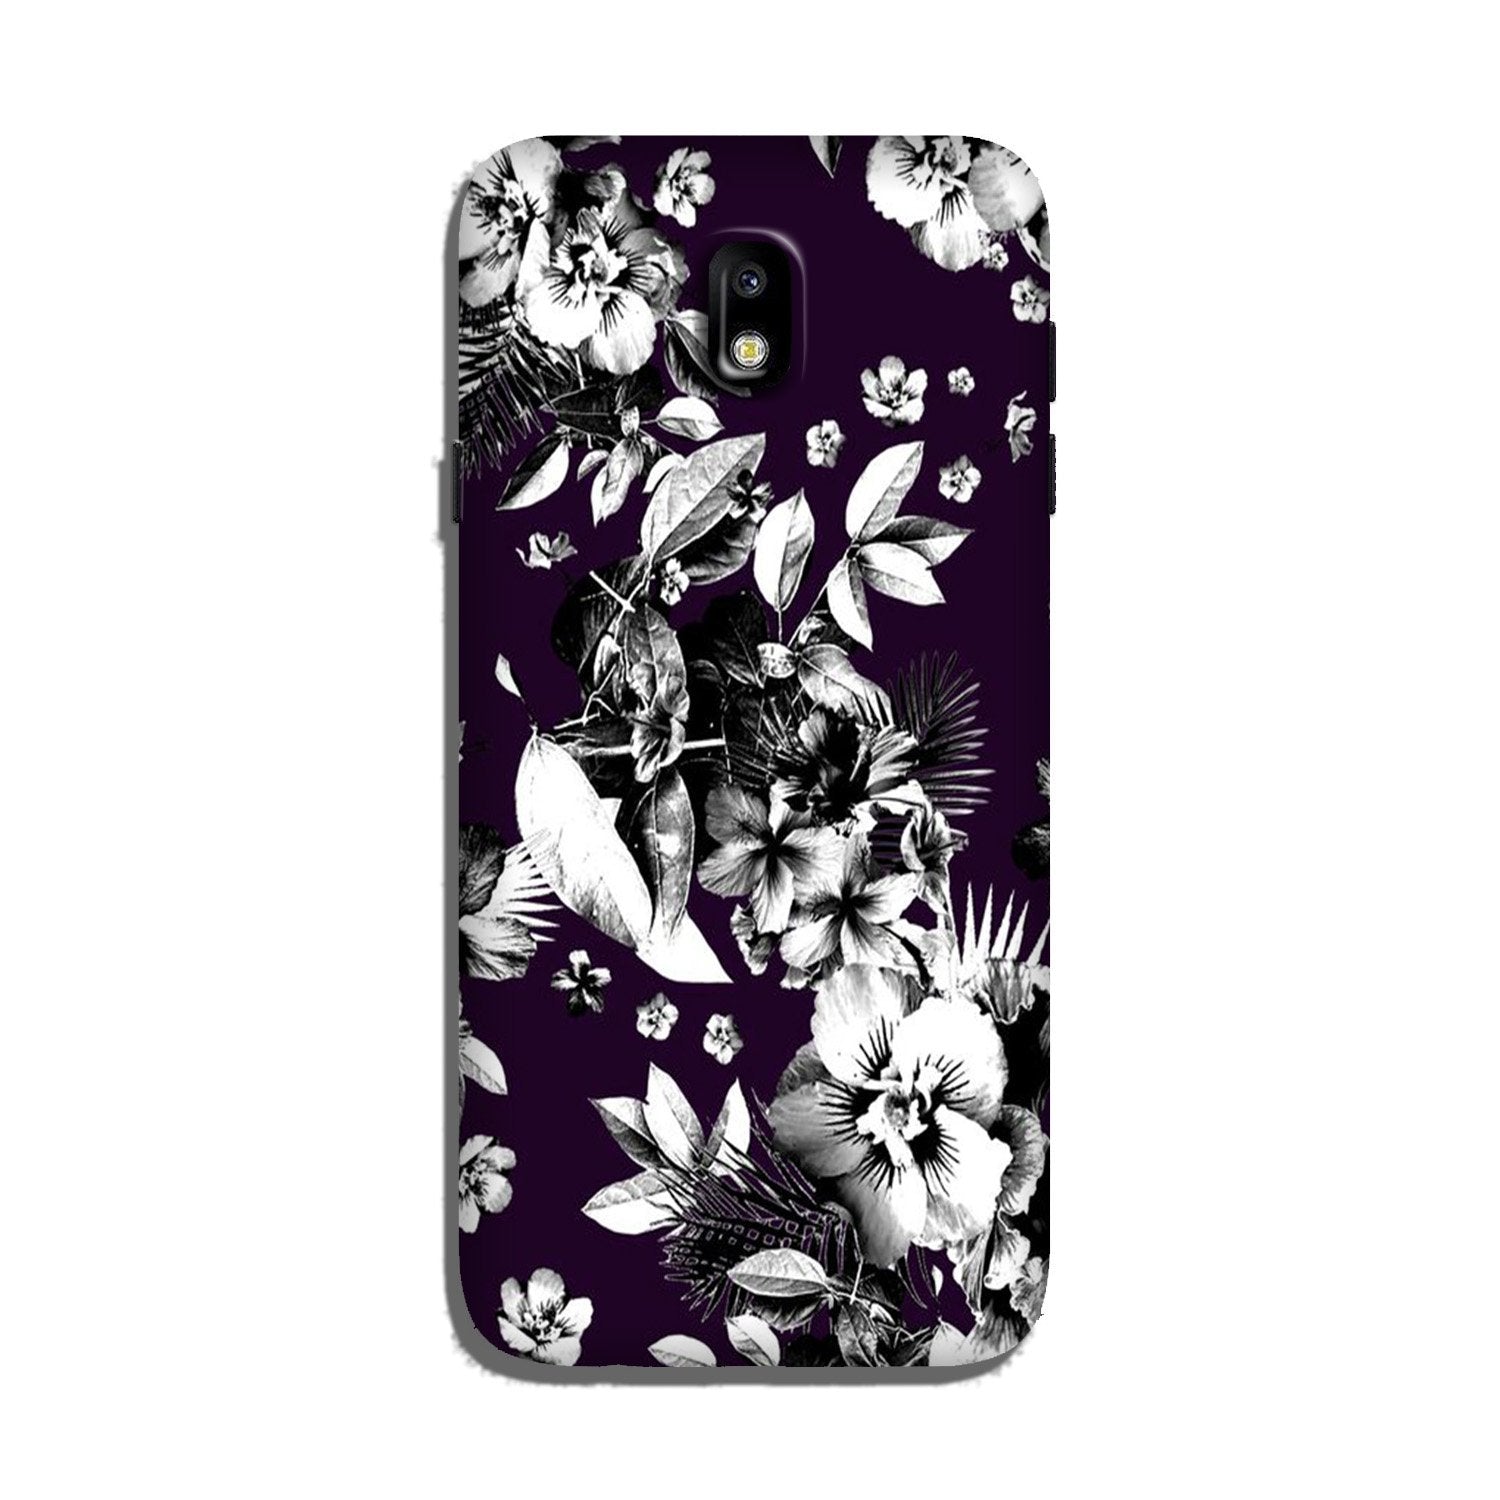 white flowers Case for Galaxy J3 Pro